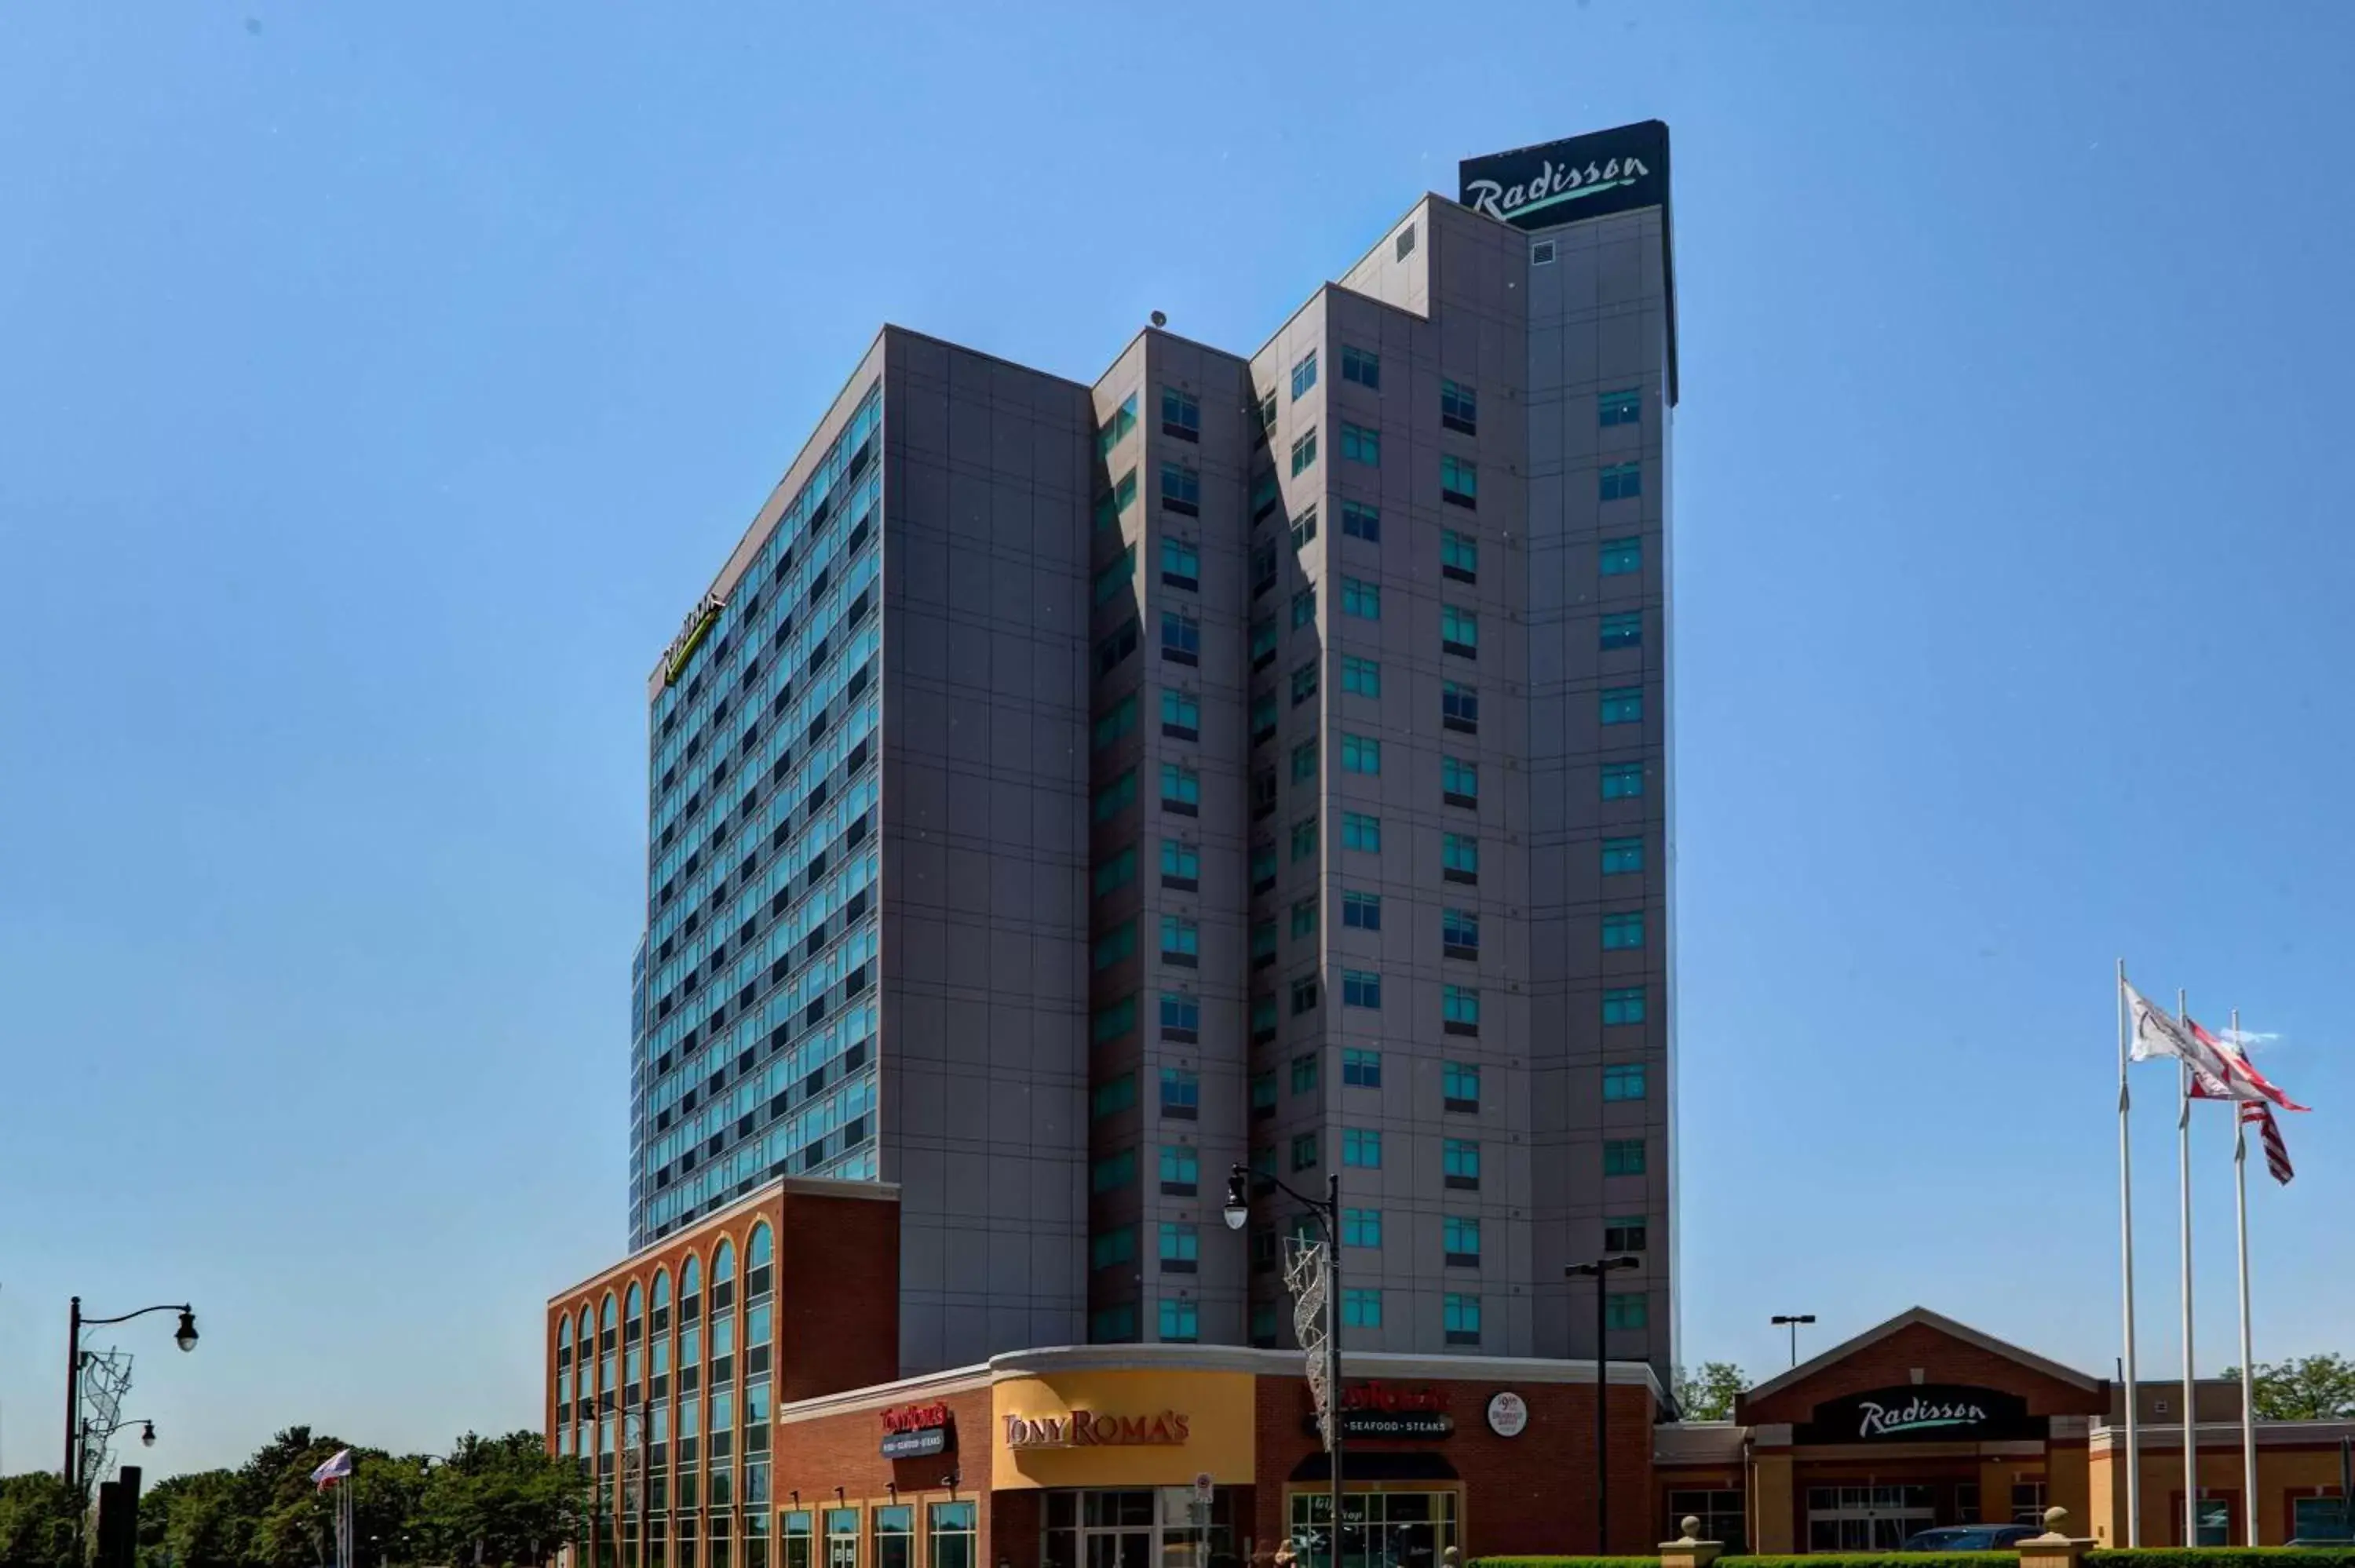 Property building in Radisson Hotel & Suites Fallsview